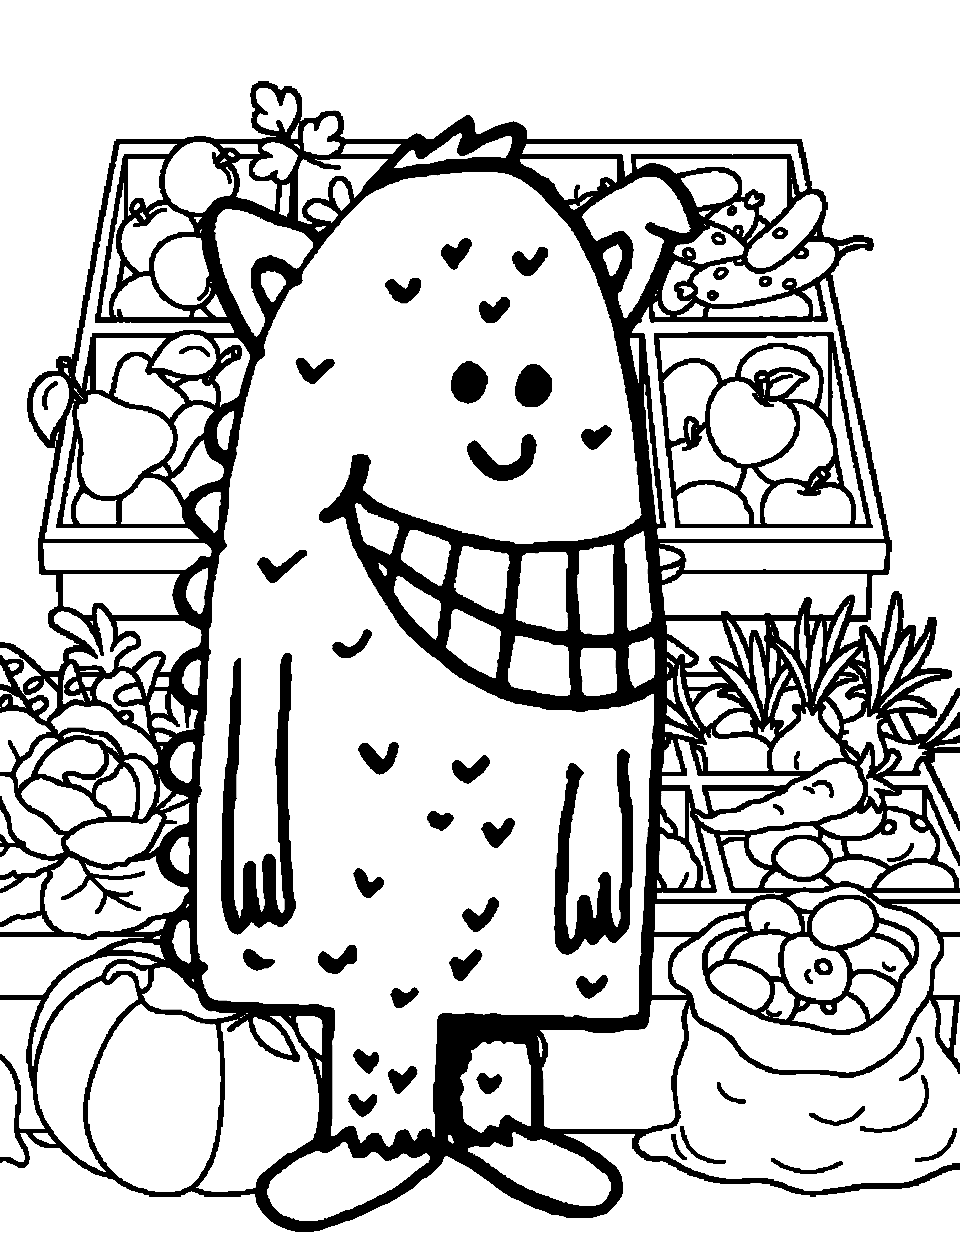 Monster at a Farmers Market Coloring Page - A monster shopping for fruits and vegetables at a farmers market.